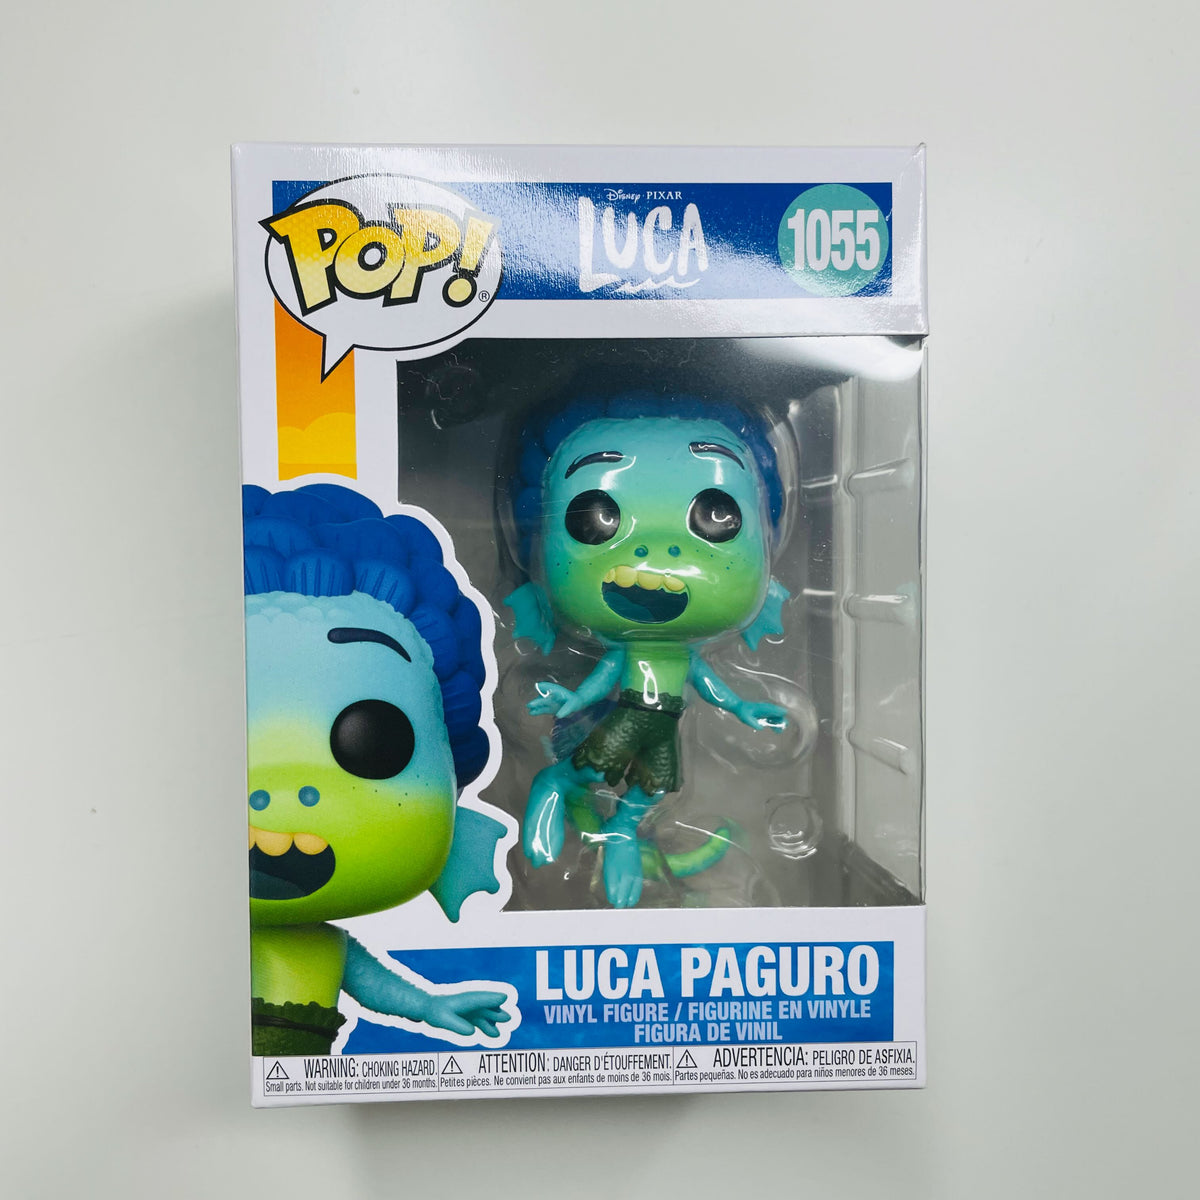 Luca Paguro from Luca